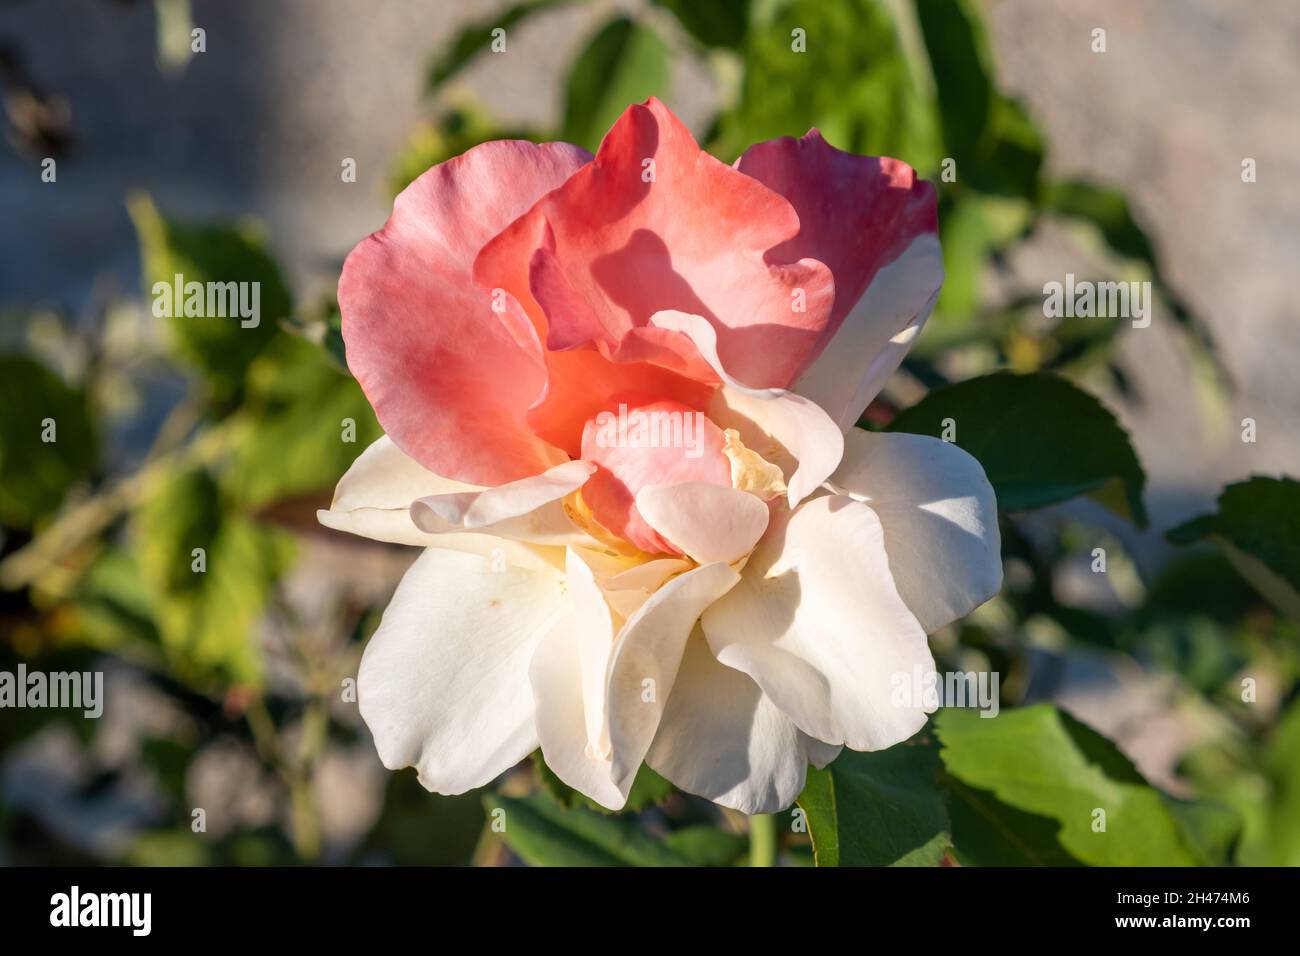 Rose multicolored perennial flowering plant. Delicate flower blooming ornamental with thorns proper for gift valentine anniversary. Edible used to foo Stock Photo